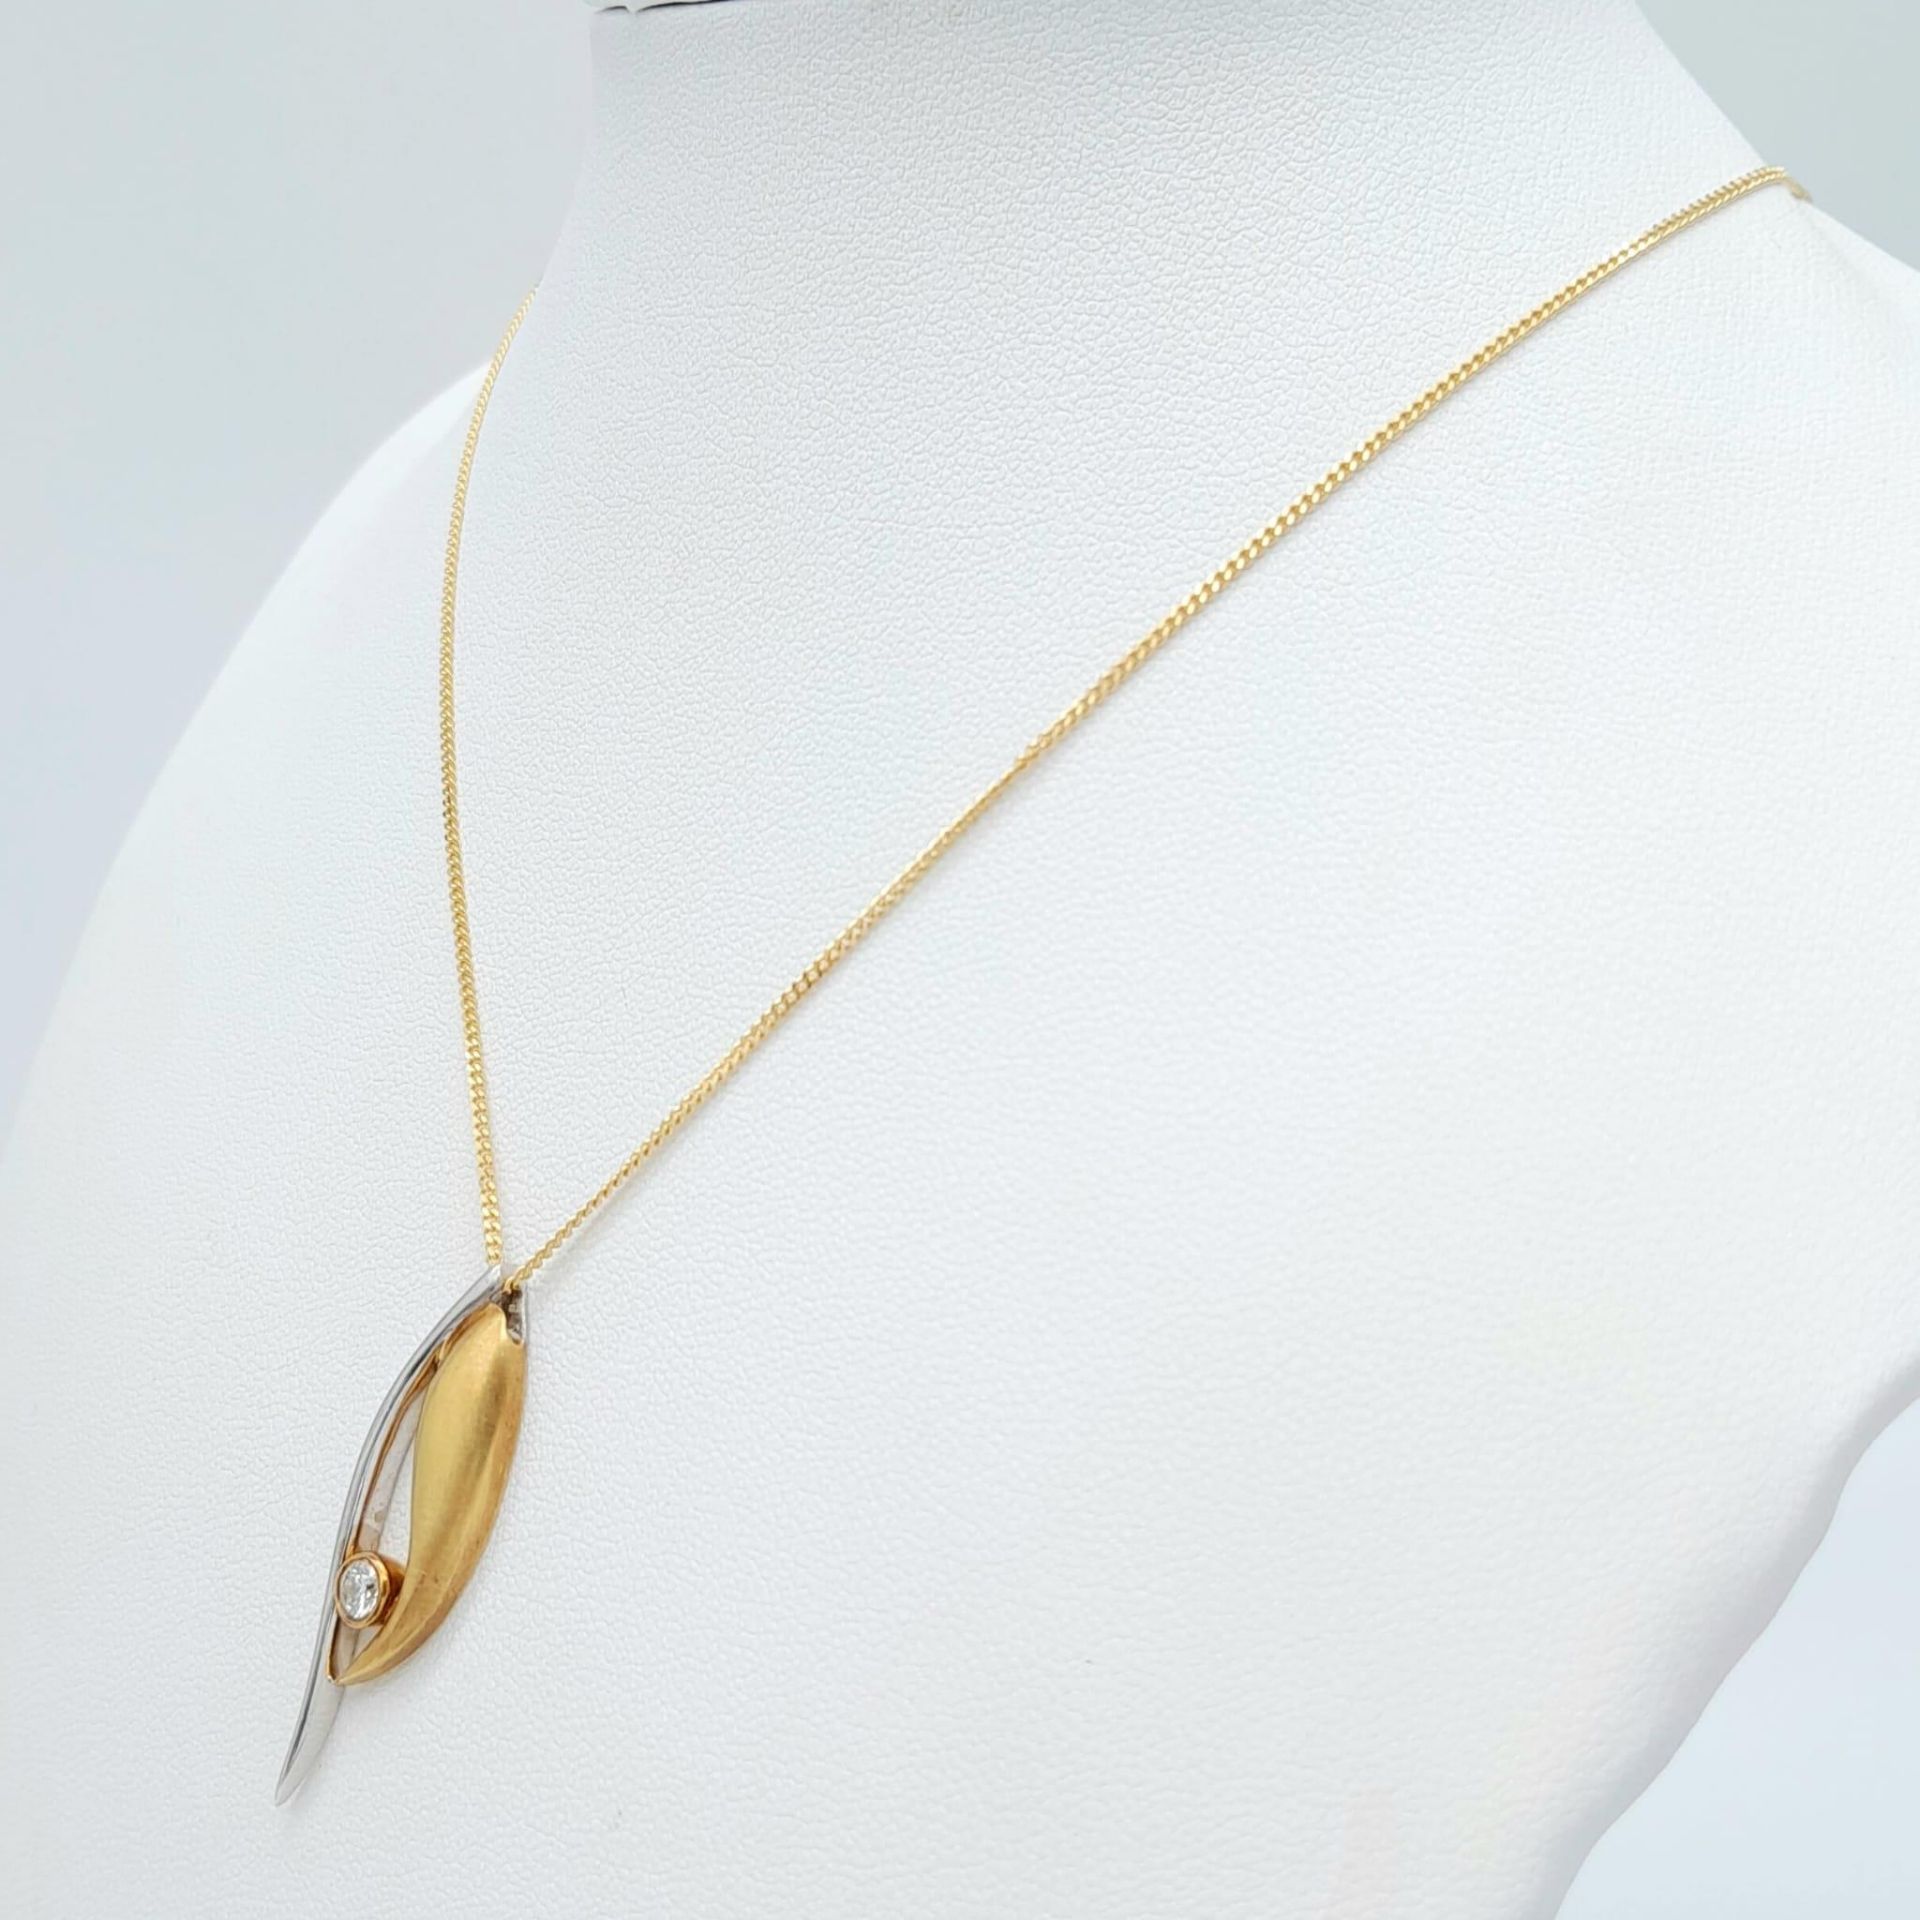 An 18K Bi Colour Gold Diamond Pendant on an 18K Yellow Gold Disappearing Necklace. 0.15ct diamond. - Image 2 of 11